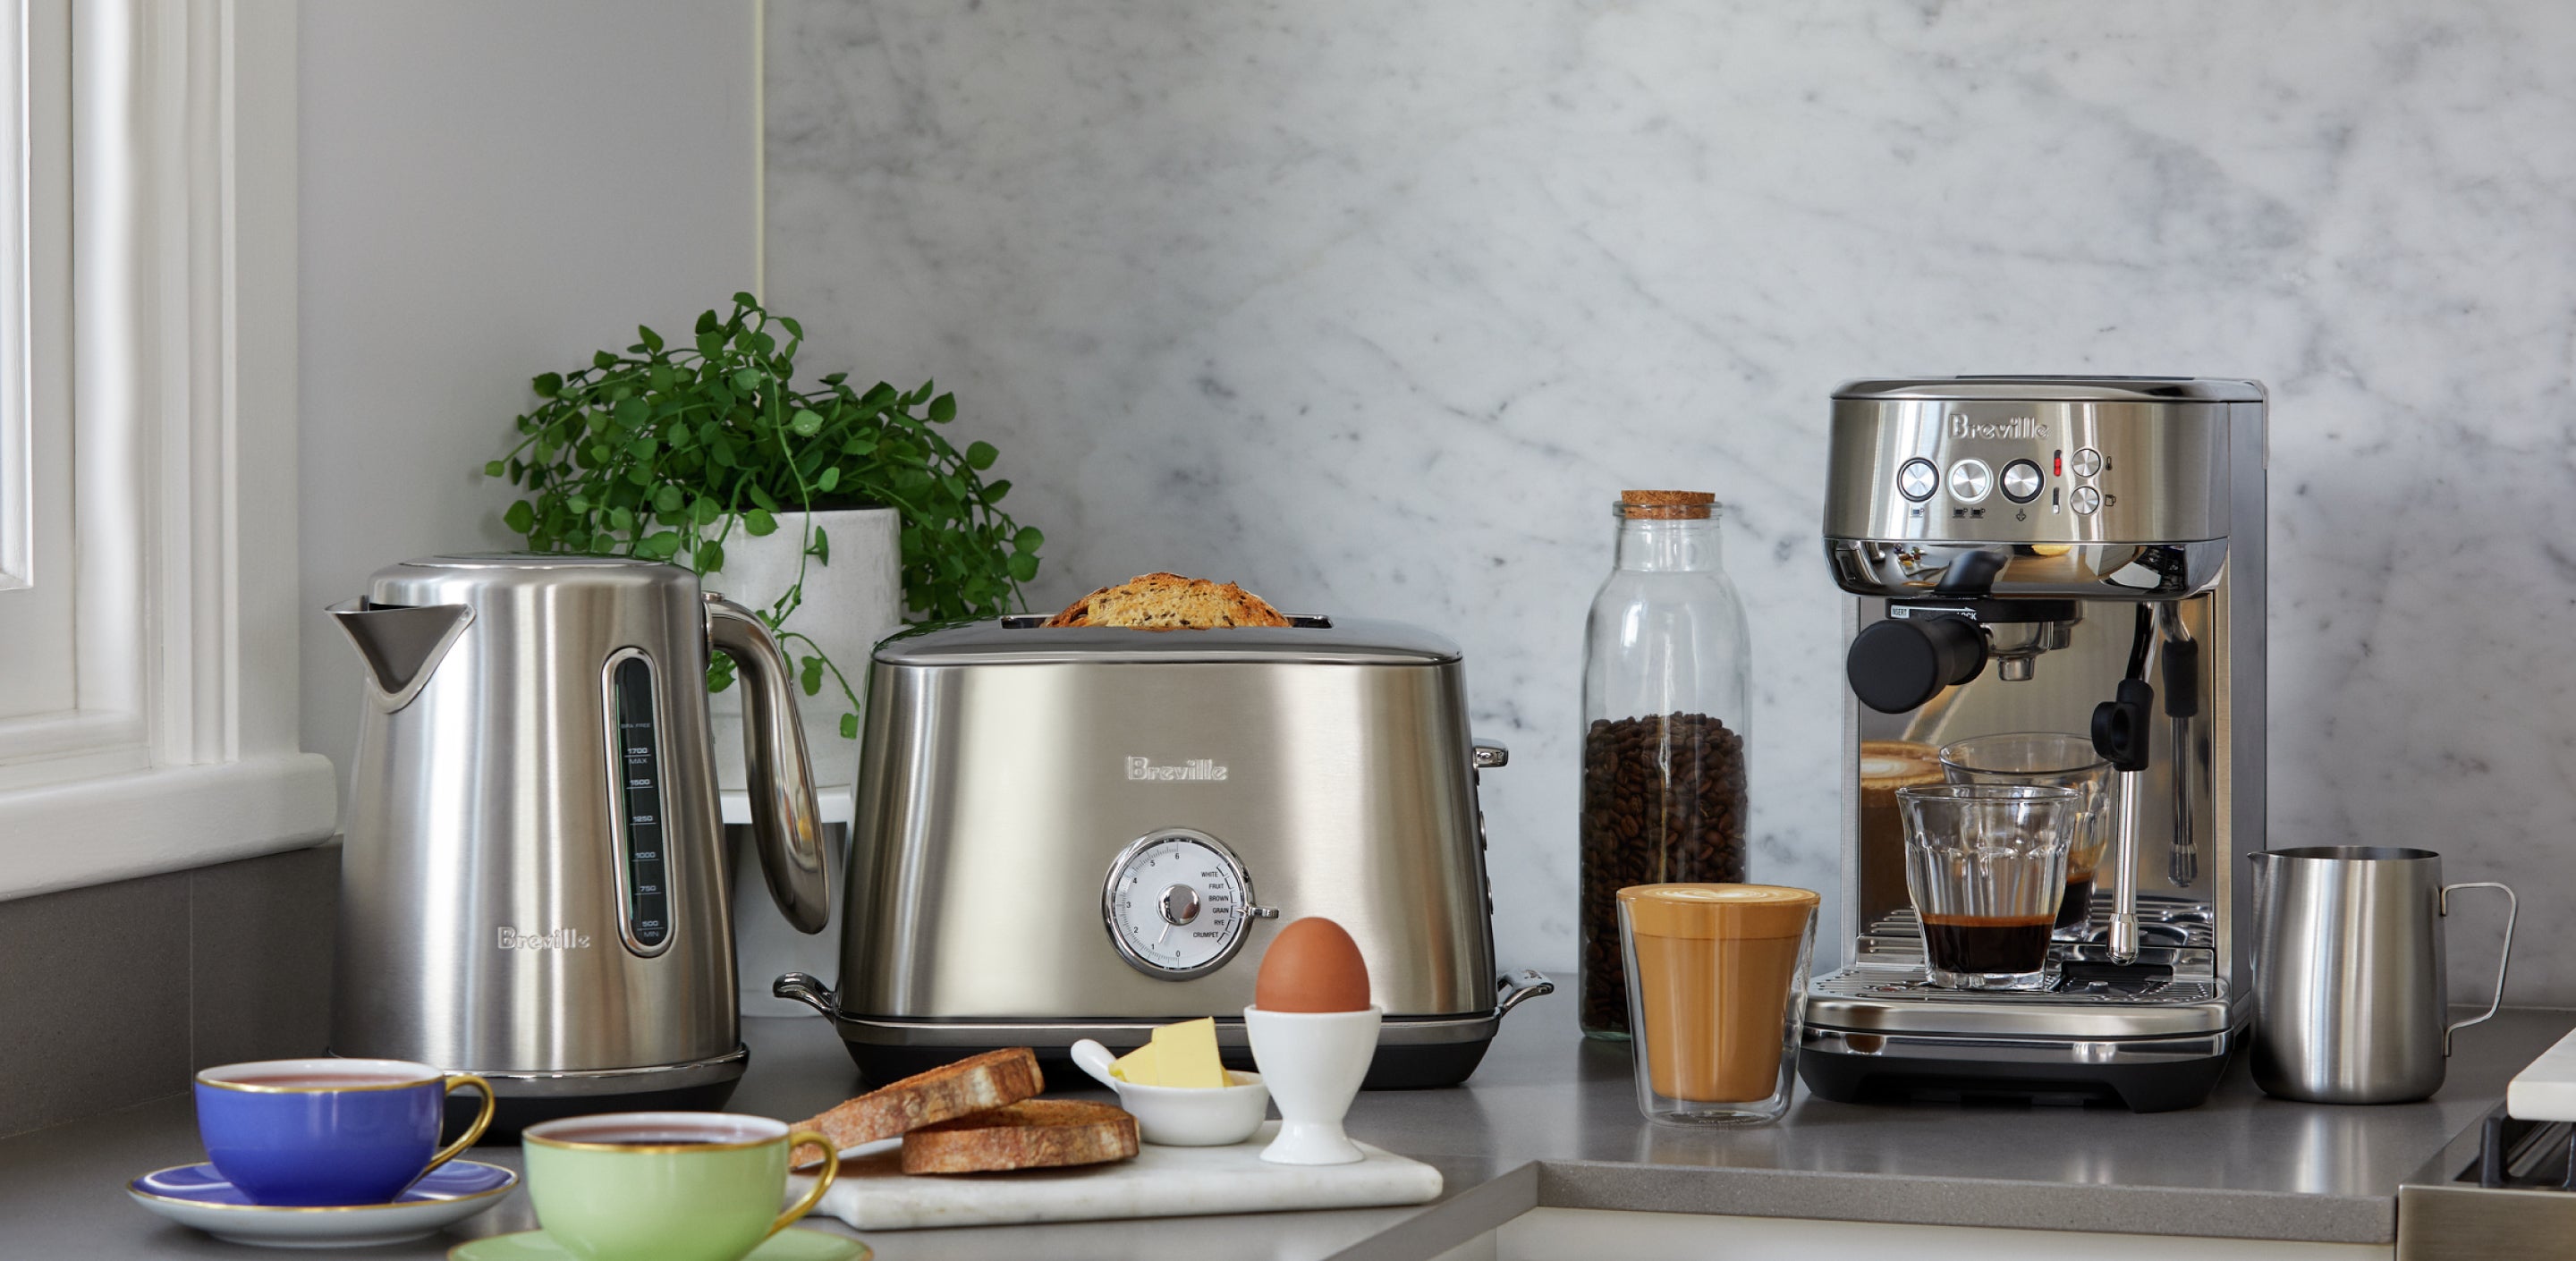 The Breville Review